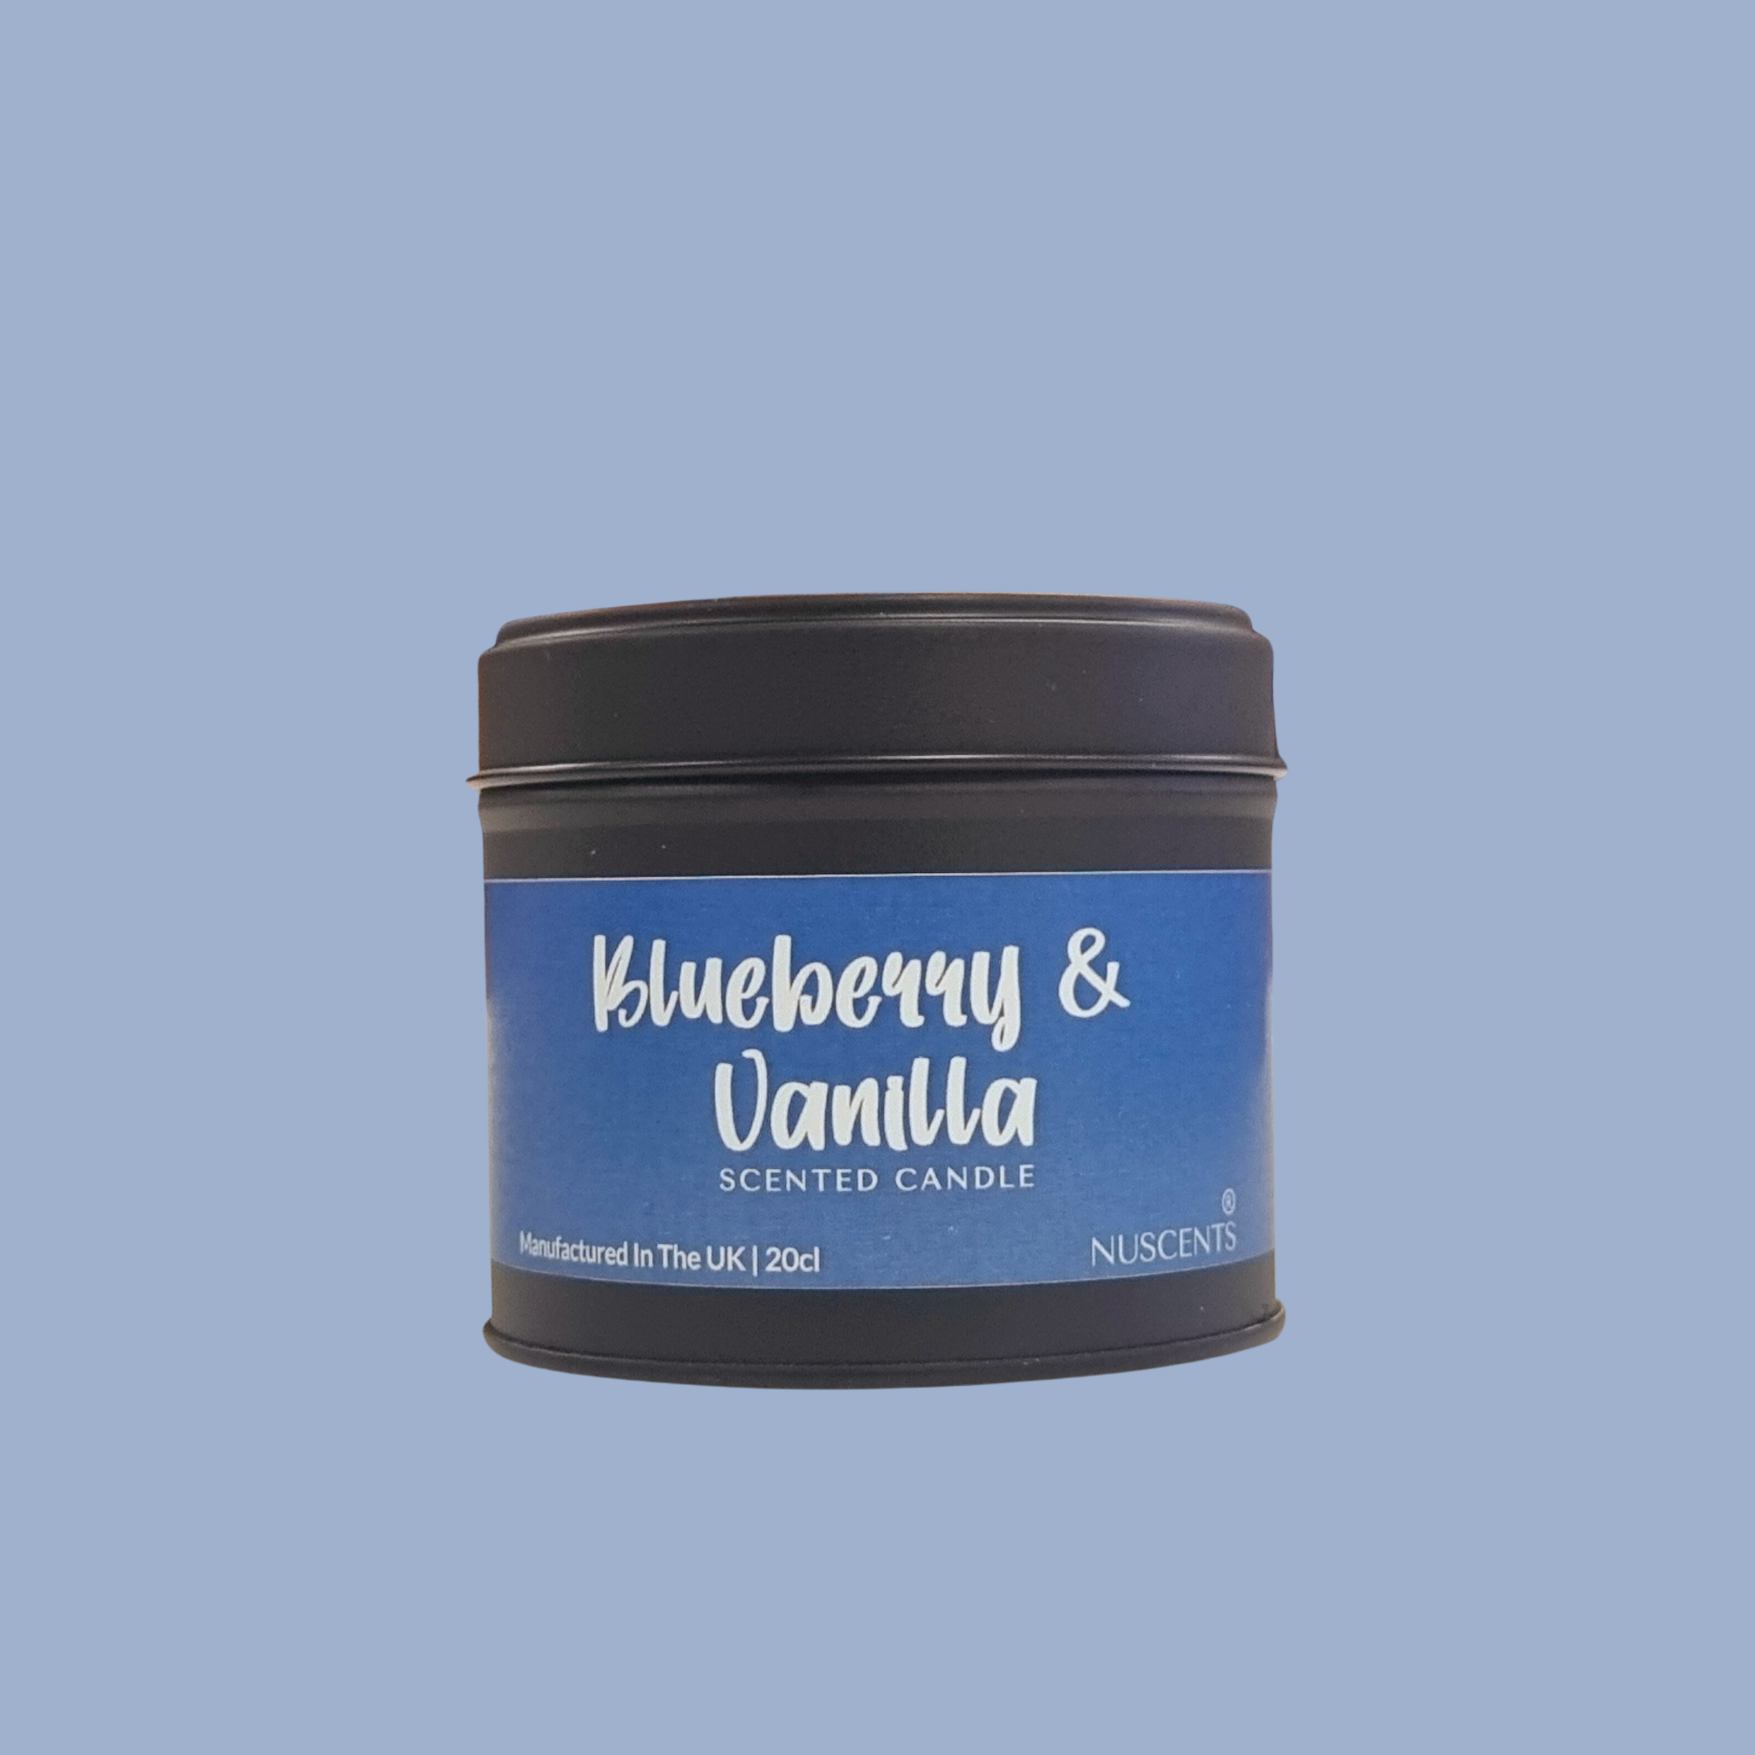 Blueberry & Vanilla Scented Candle